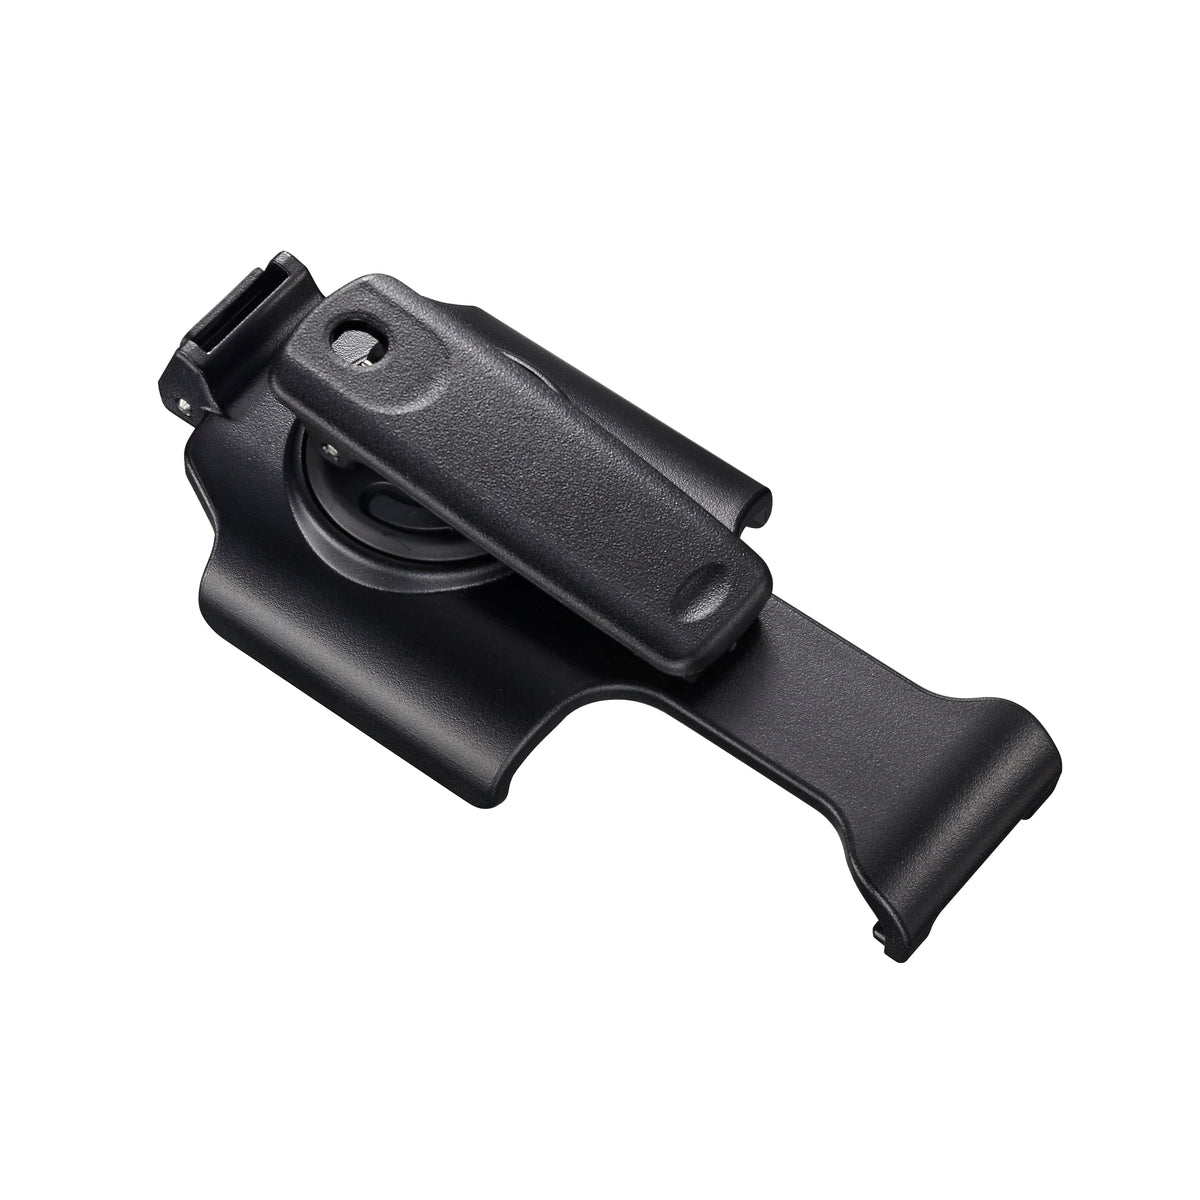 Standard Horizon Qualifies for Free Shipping Standard SHB-110 Quick Release Holster for HX320 #SHB-110